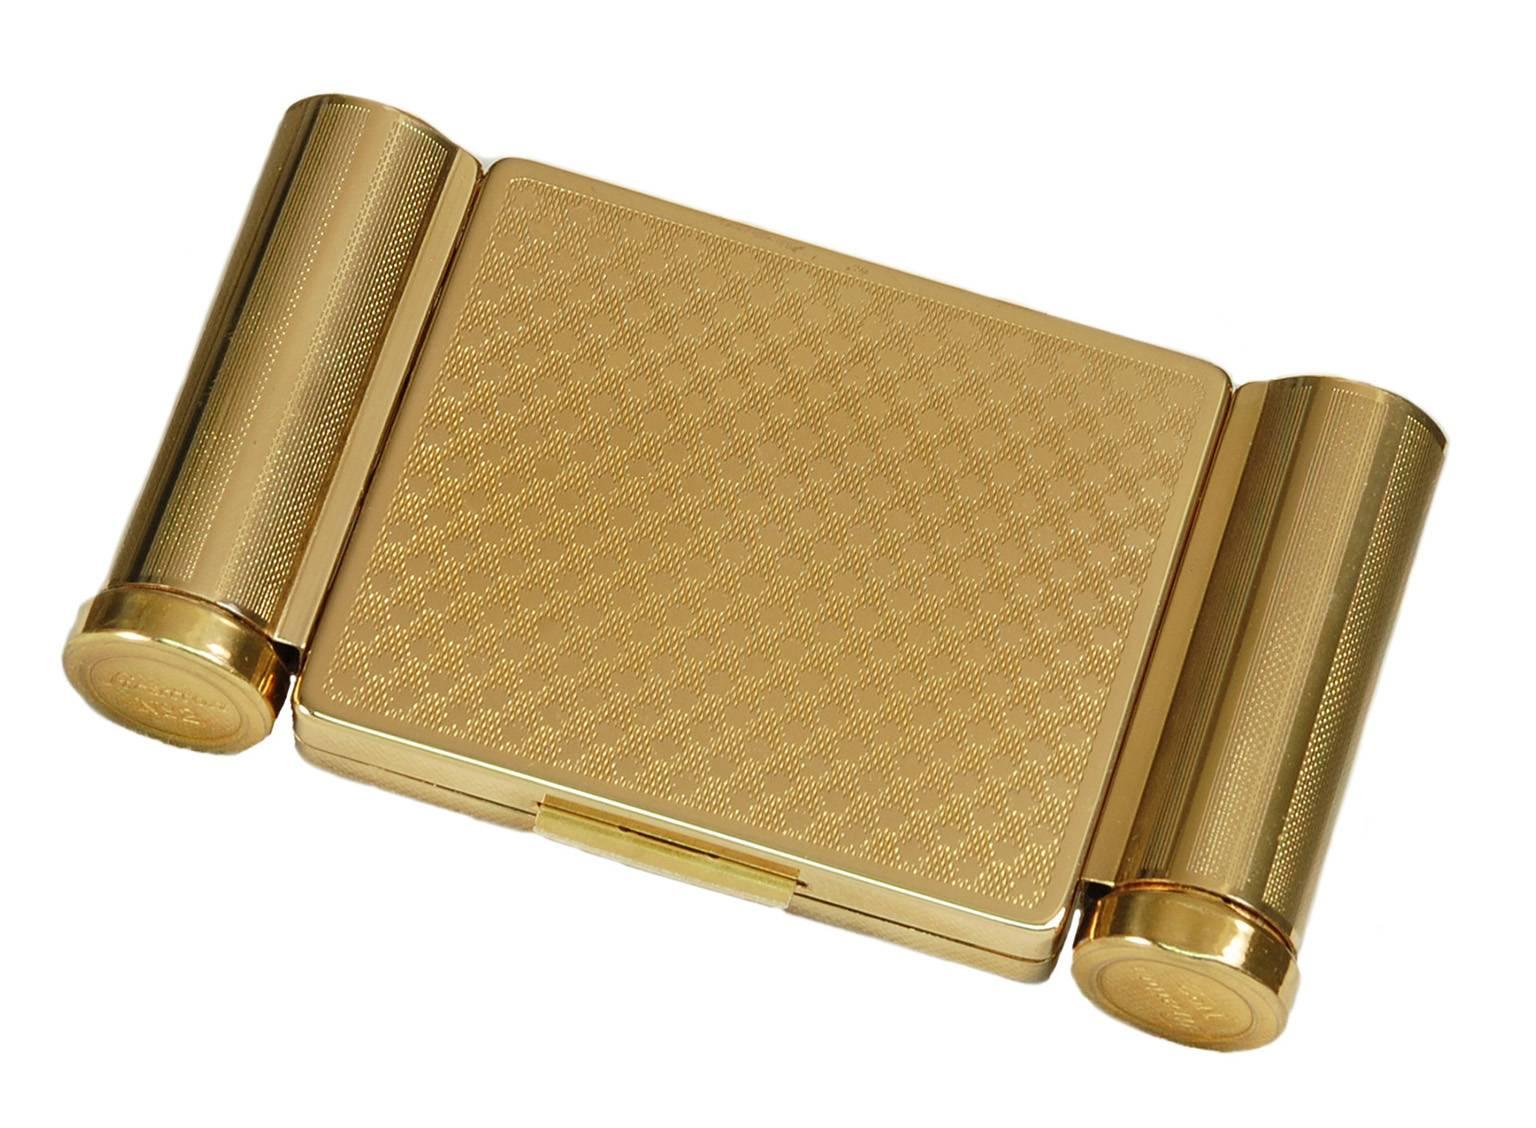 The ultimate in superluxe bygone glamour: a never-used, perfectly-preserved Stratton compact with a loose powder (or cash) well, lipstick case and perfume dauber in a package no larger than a cell phone. A refined way to keep everything you need